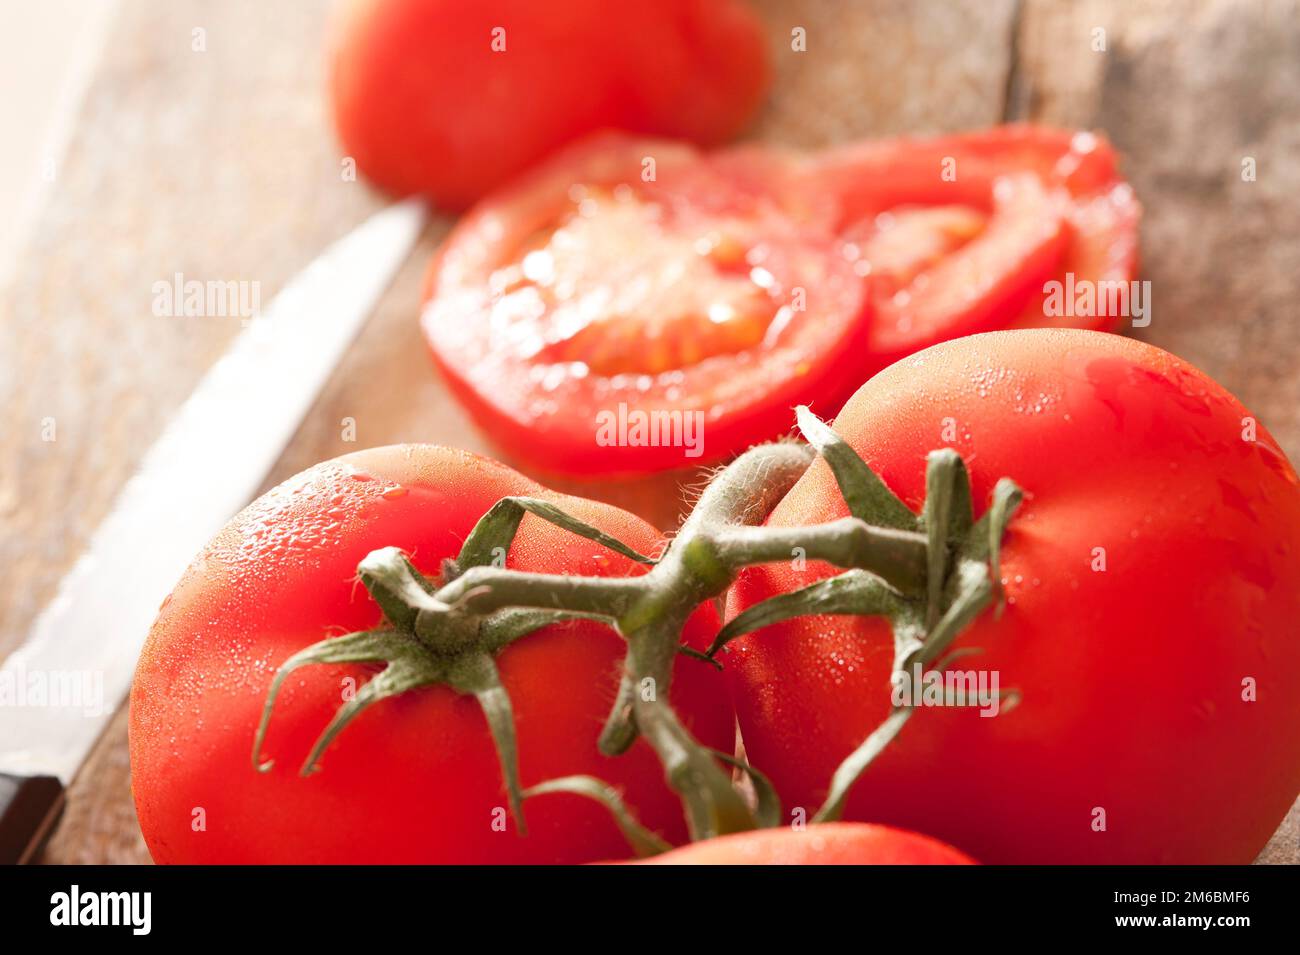 Close up view of succulent red tomatoes on vine Stock Photo